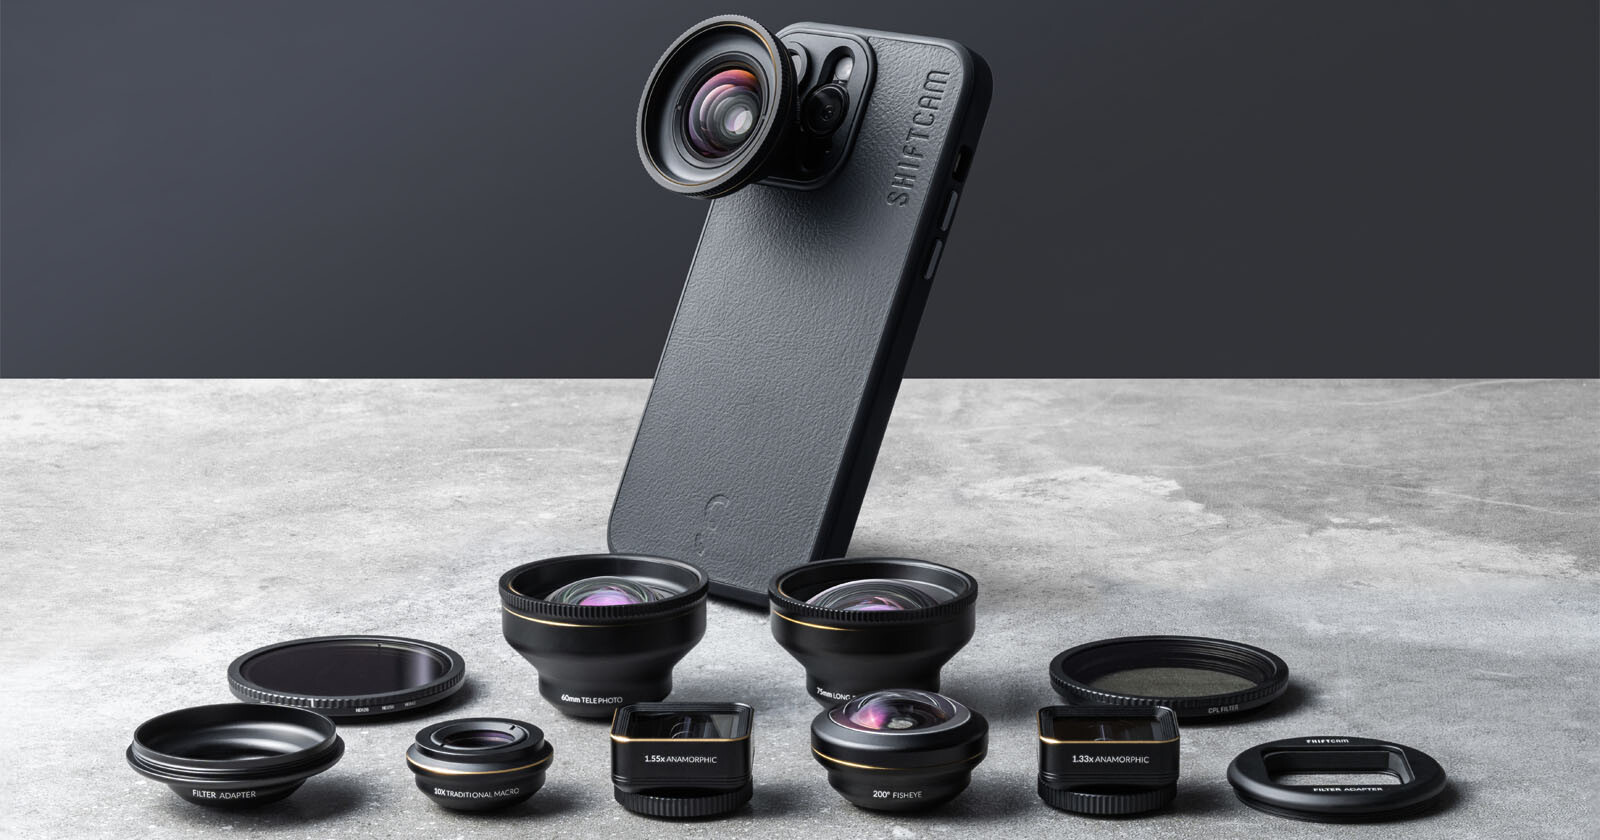  shiftcam lensultra smartphone lenses promise unmatched clarity 